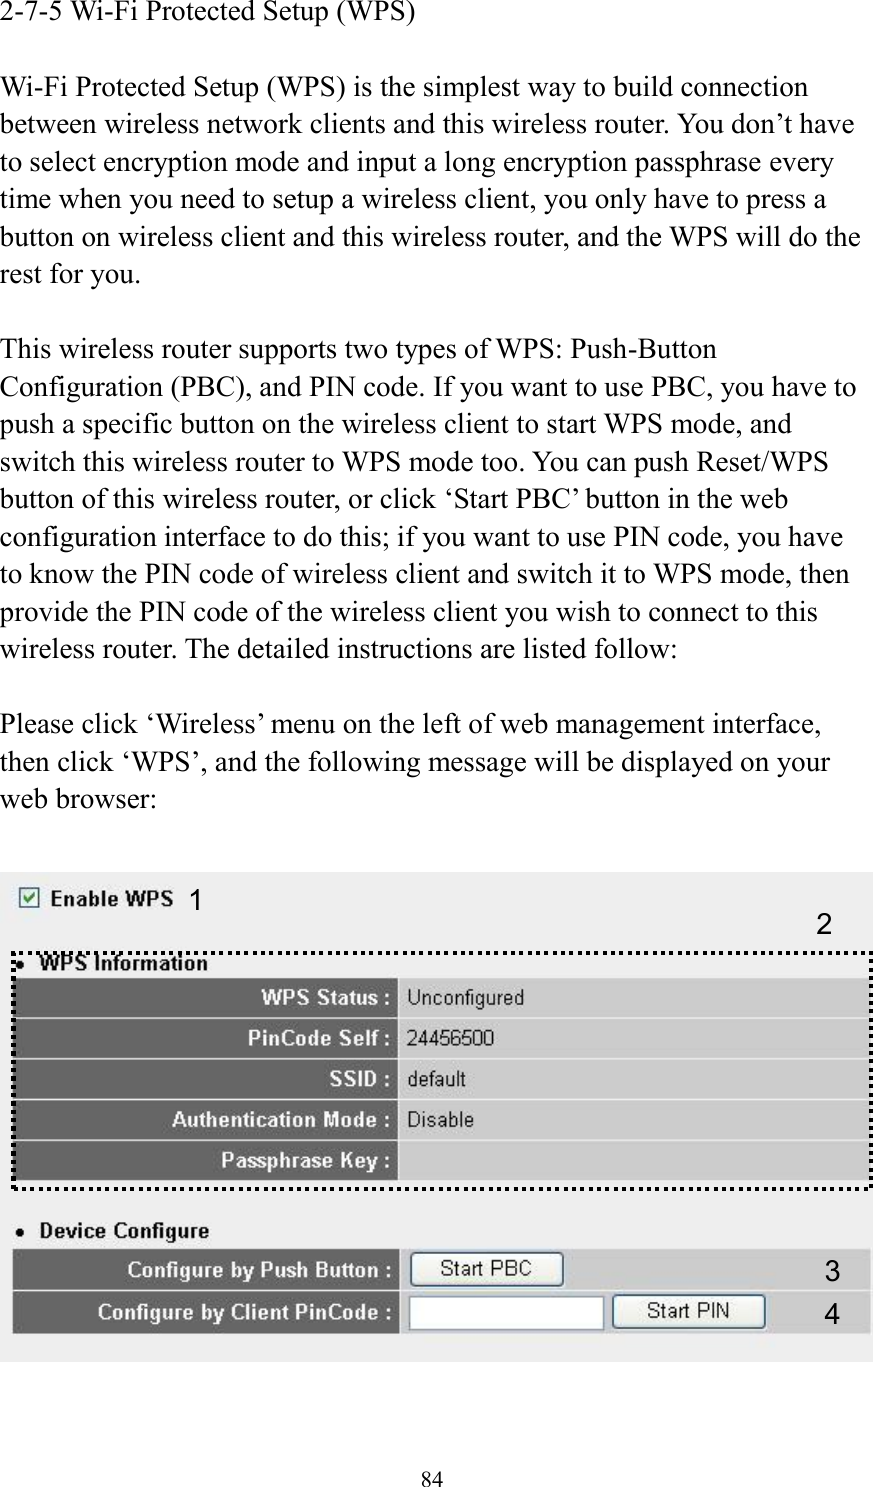 84 2-7-5 Wi-Fi Protected Setup (WPS)  Wi-Fi Protected Setup (WPS) is the simplest way to build connection between wireless network clients and this wireless router. You don’t have to select encryption mode and input a long encryption passphrase every time when you need to setup a wireless client, you only have to press a button on wireless client and this wireless router, and the WPS will do the rest for you.  This wireless router supports two types of WPS: Push-Button Configuration (PBC), and PIN code. If you want to use PBC, you have to push a specific button on the wireless client to start WPS mode, and switch this wireless router to WPS mode too. You can push Reset/WPS button of this wireless router, or click ‘Start PBC’ button in the web configuration interface to do this; if you want to use PIN code, you have to know the PIN code of wireless client and switch it to WPS mode, then provide the PIN code of the wireless client you wish to connect to this wireless router. The detailed instructions are listed follow:  Please click ‘Wireless’ menu on the left of web management interface, then click ‘WPS’, and the following message will be displayed on your web browser:    1 3 4 2 